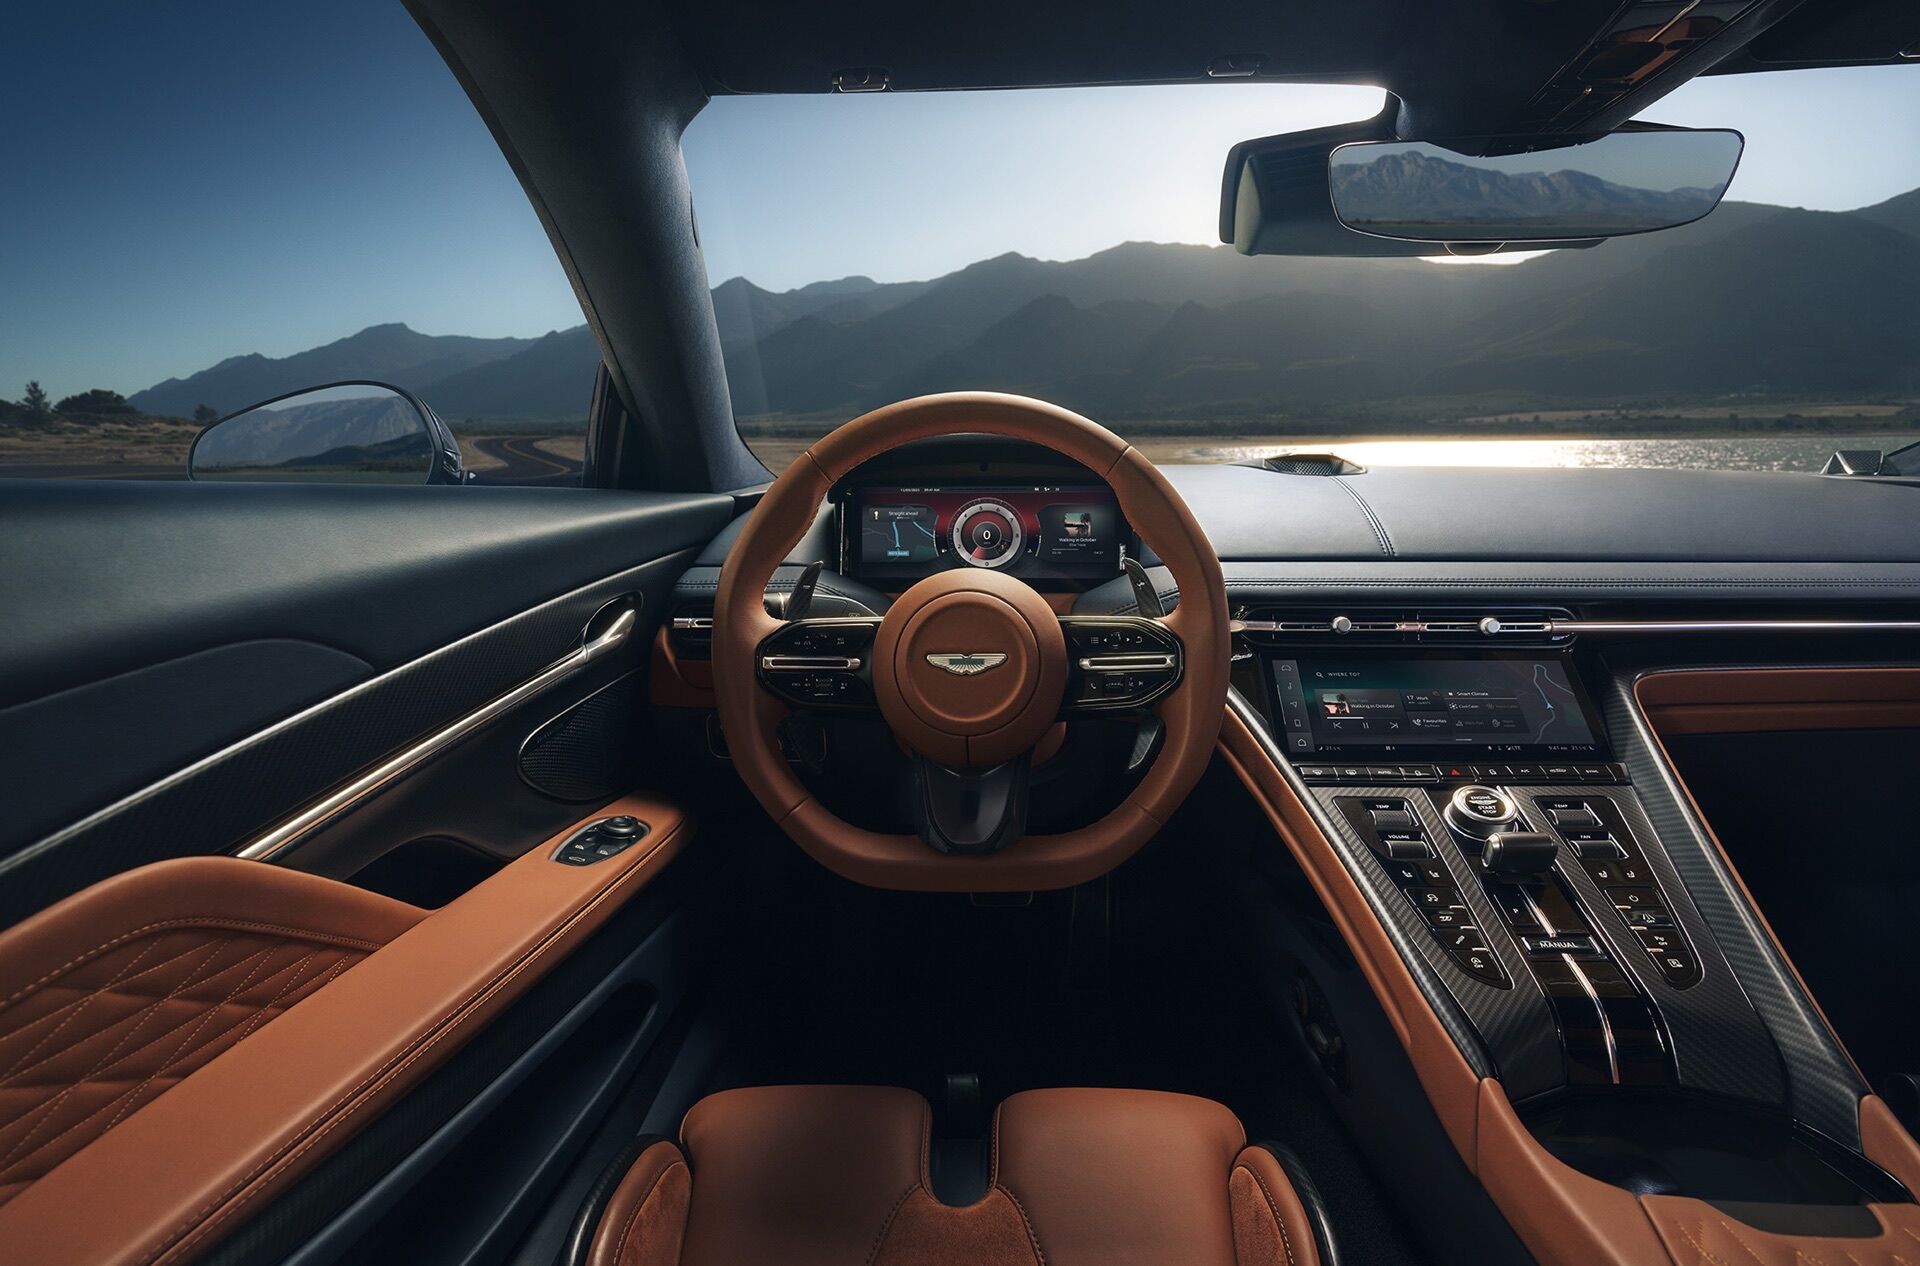 Make a statement with the Aston Martin DB12 from Aston Martin Orlando. This breathtaking sports car offers unparalleled performance and an unforgettable driving experience.